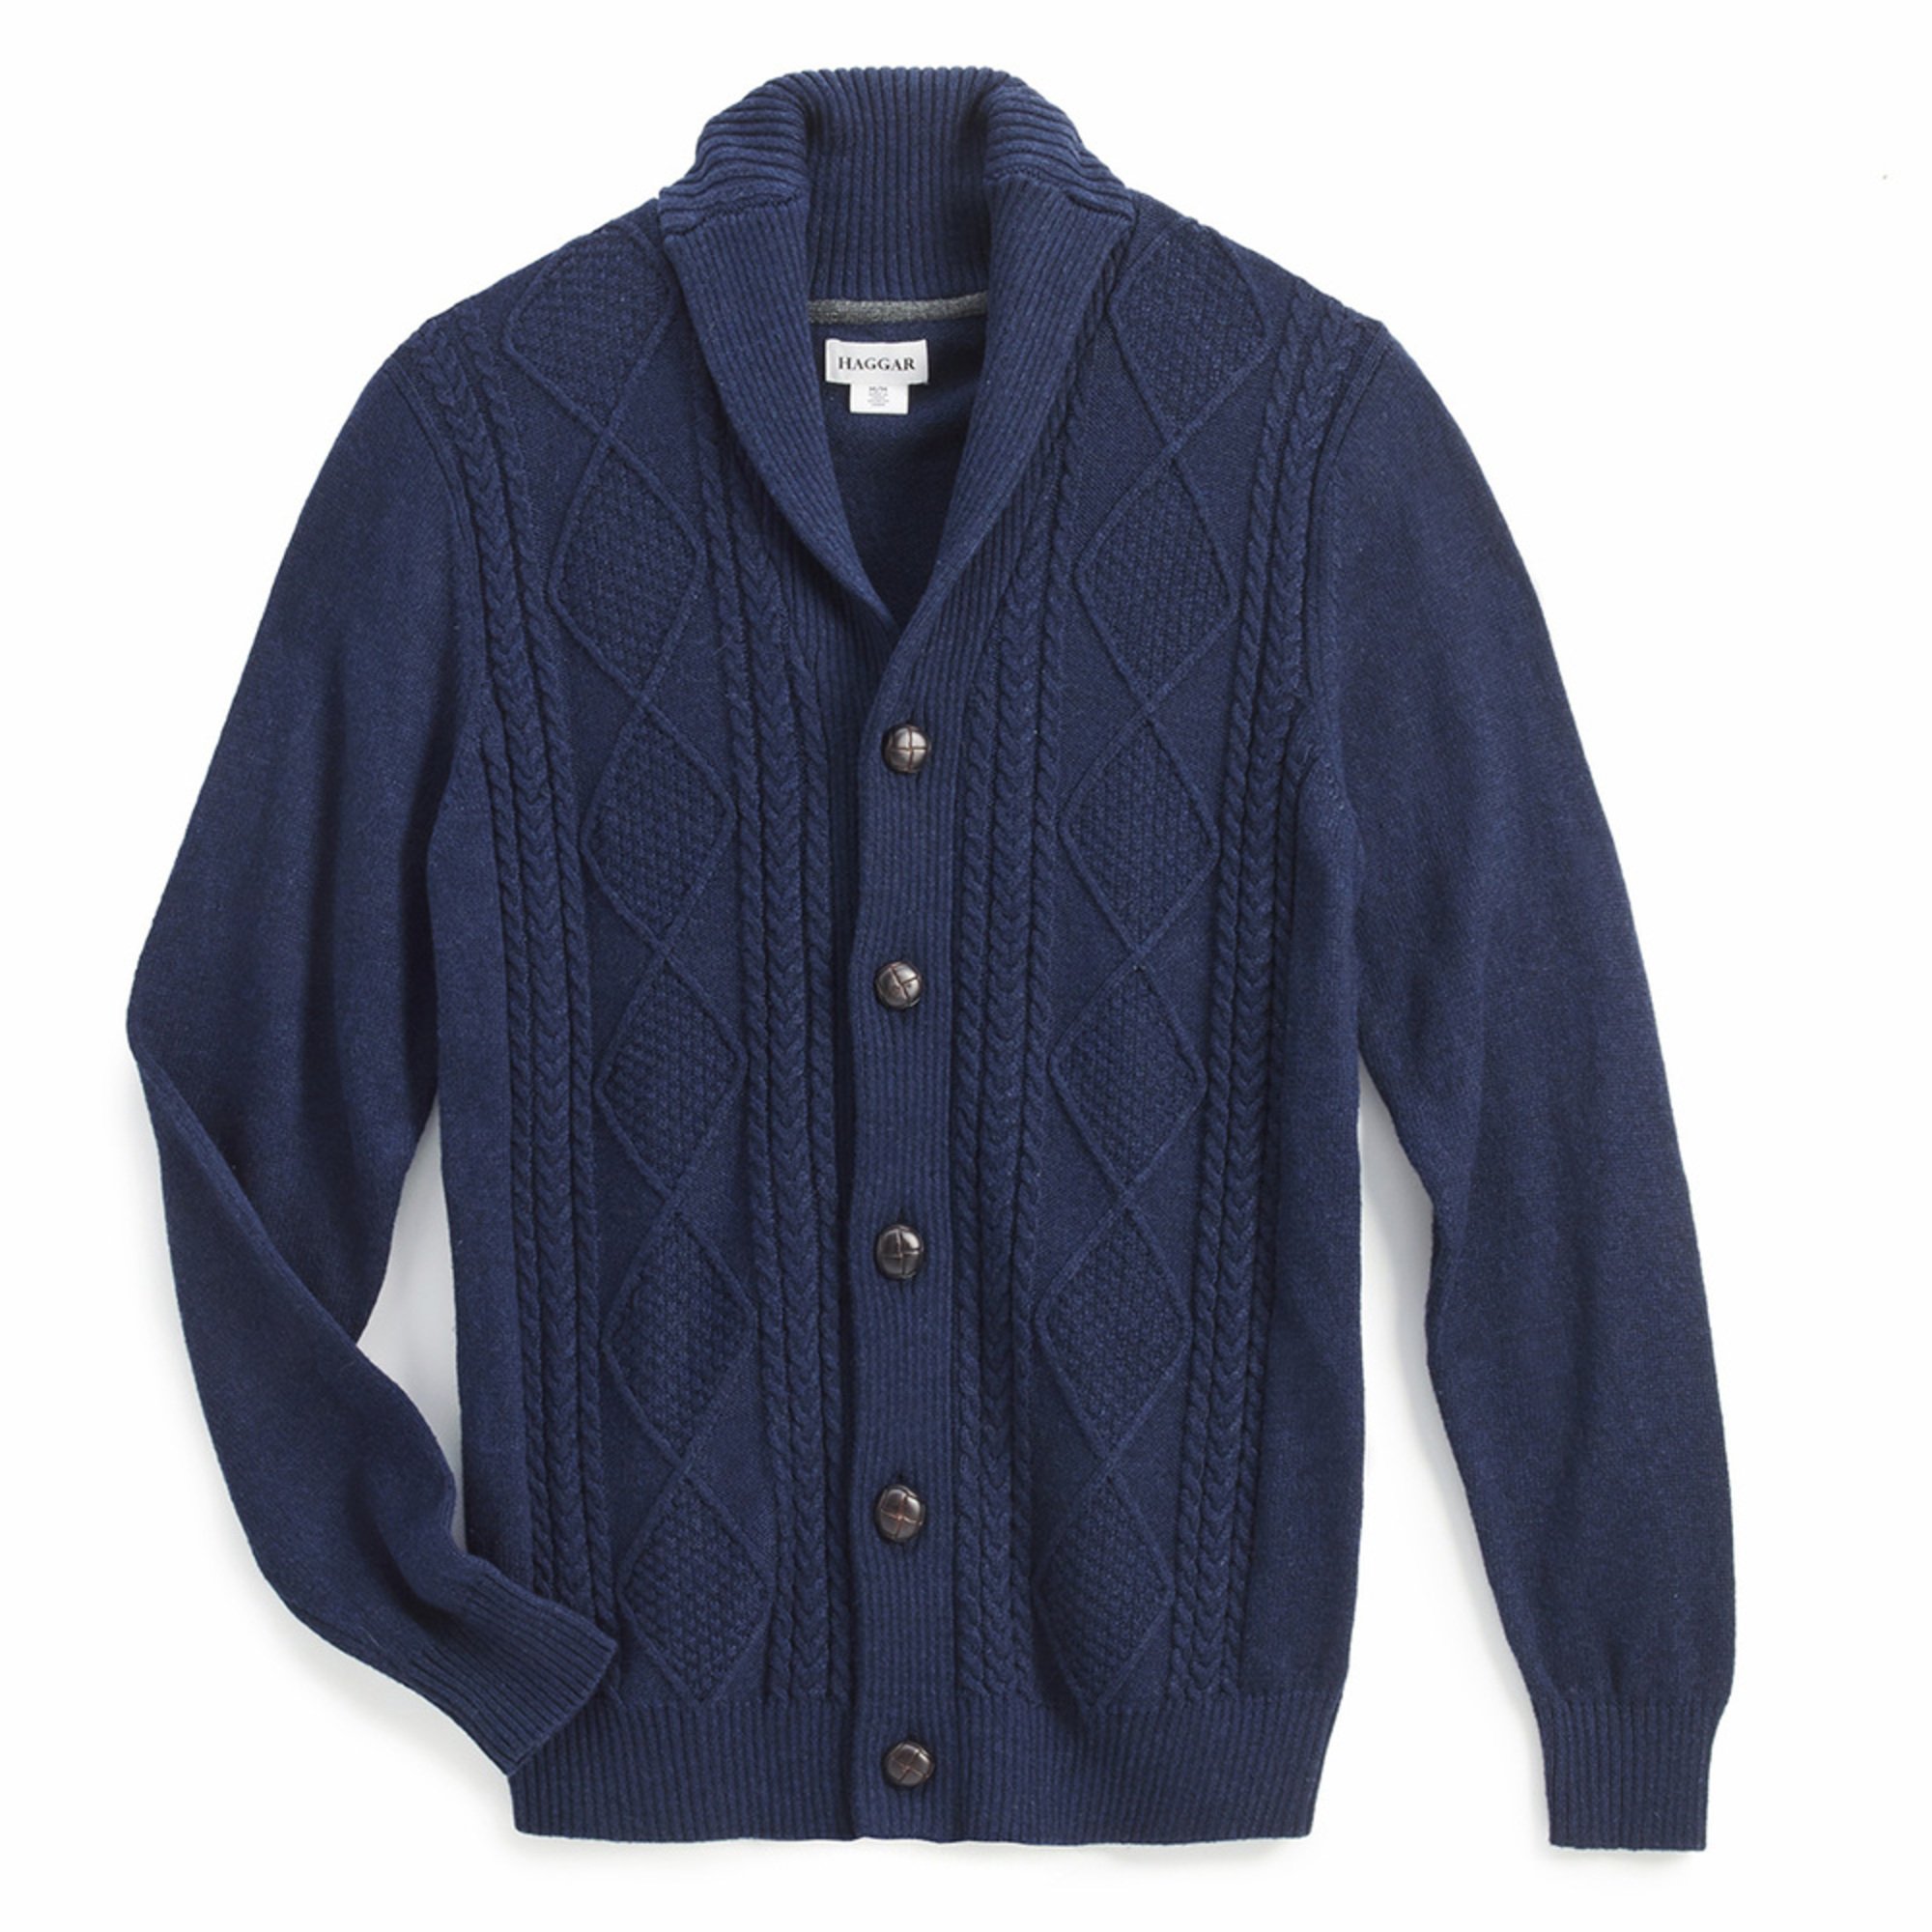 Haggar Men's Textured Cable Shawl Cardigan Sweater | Sweaters For The ...